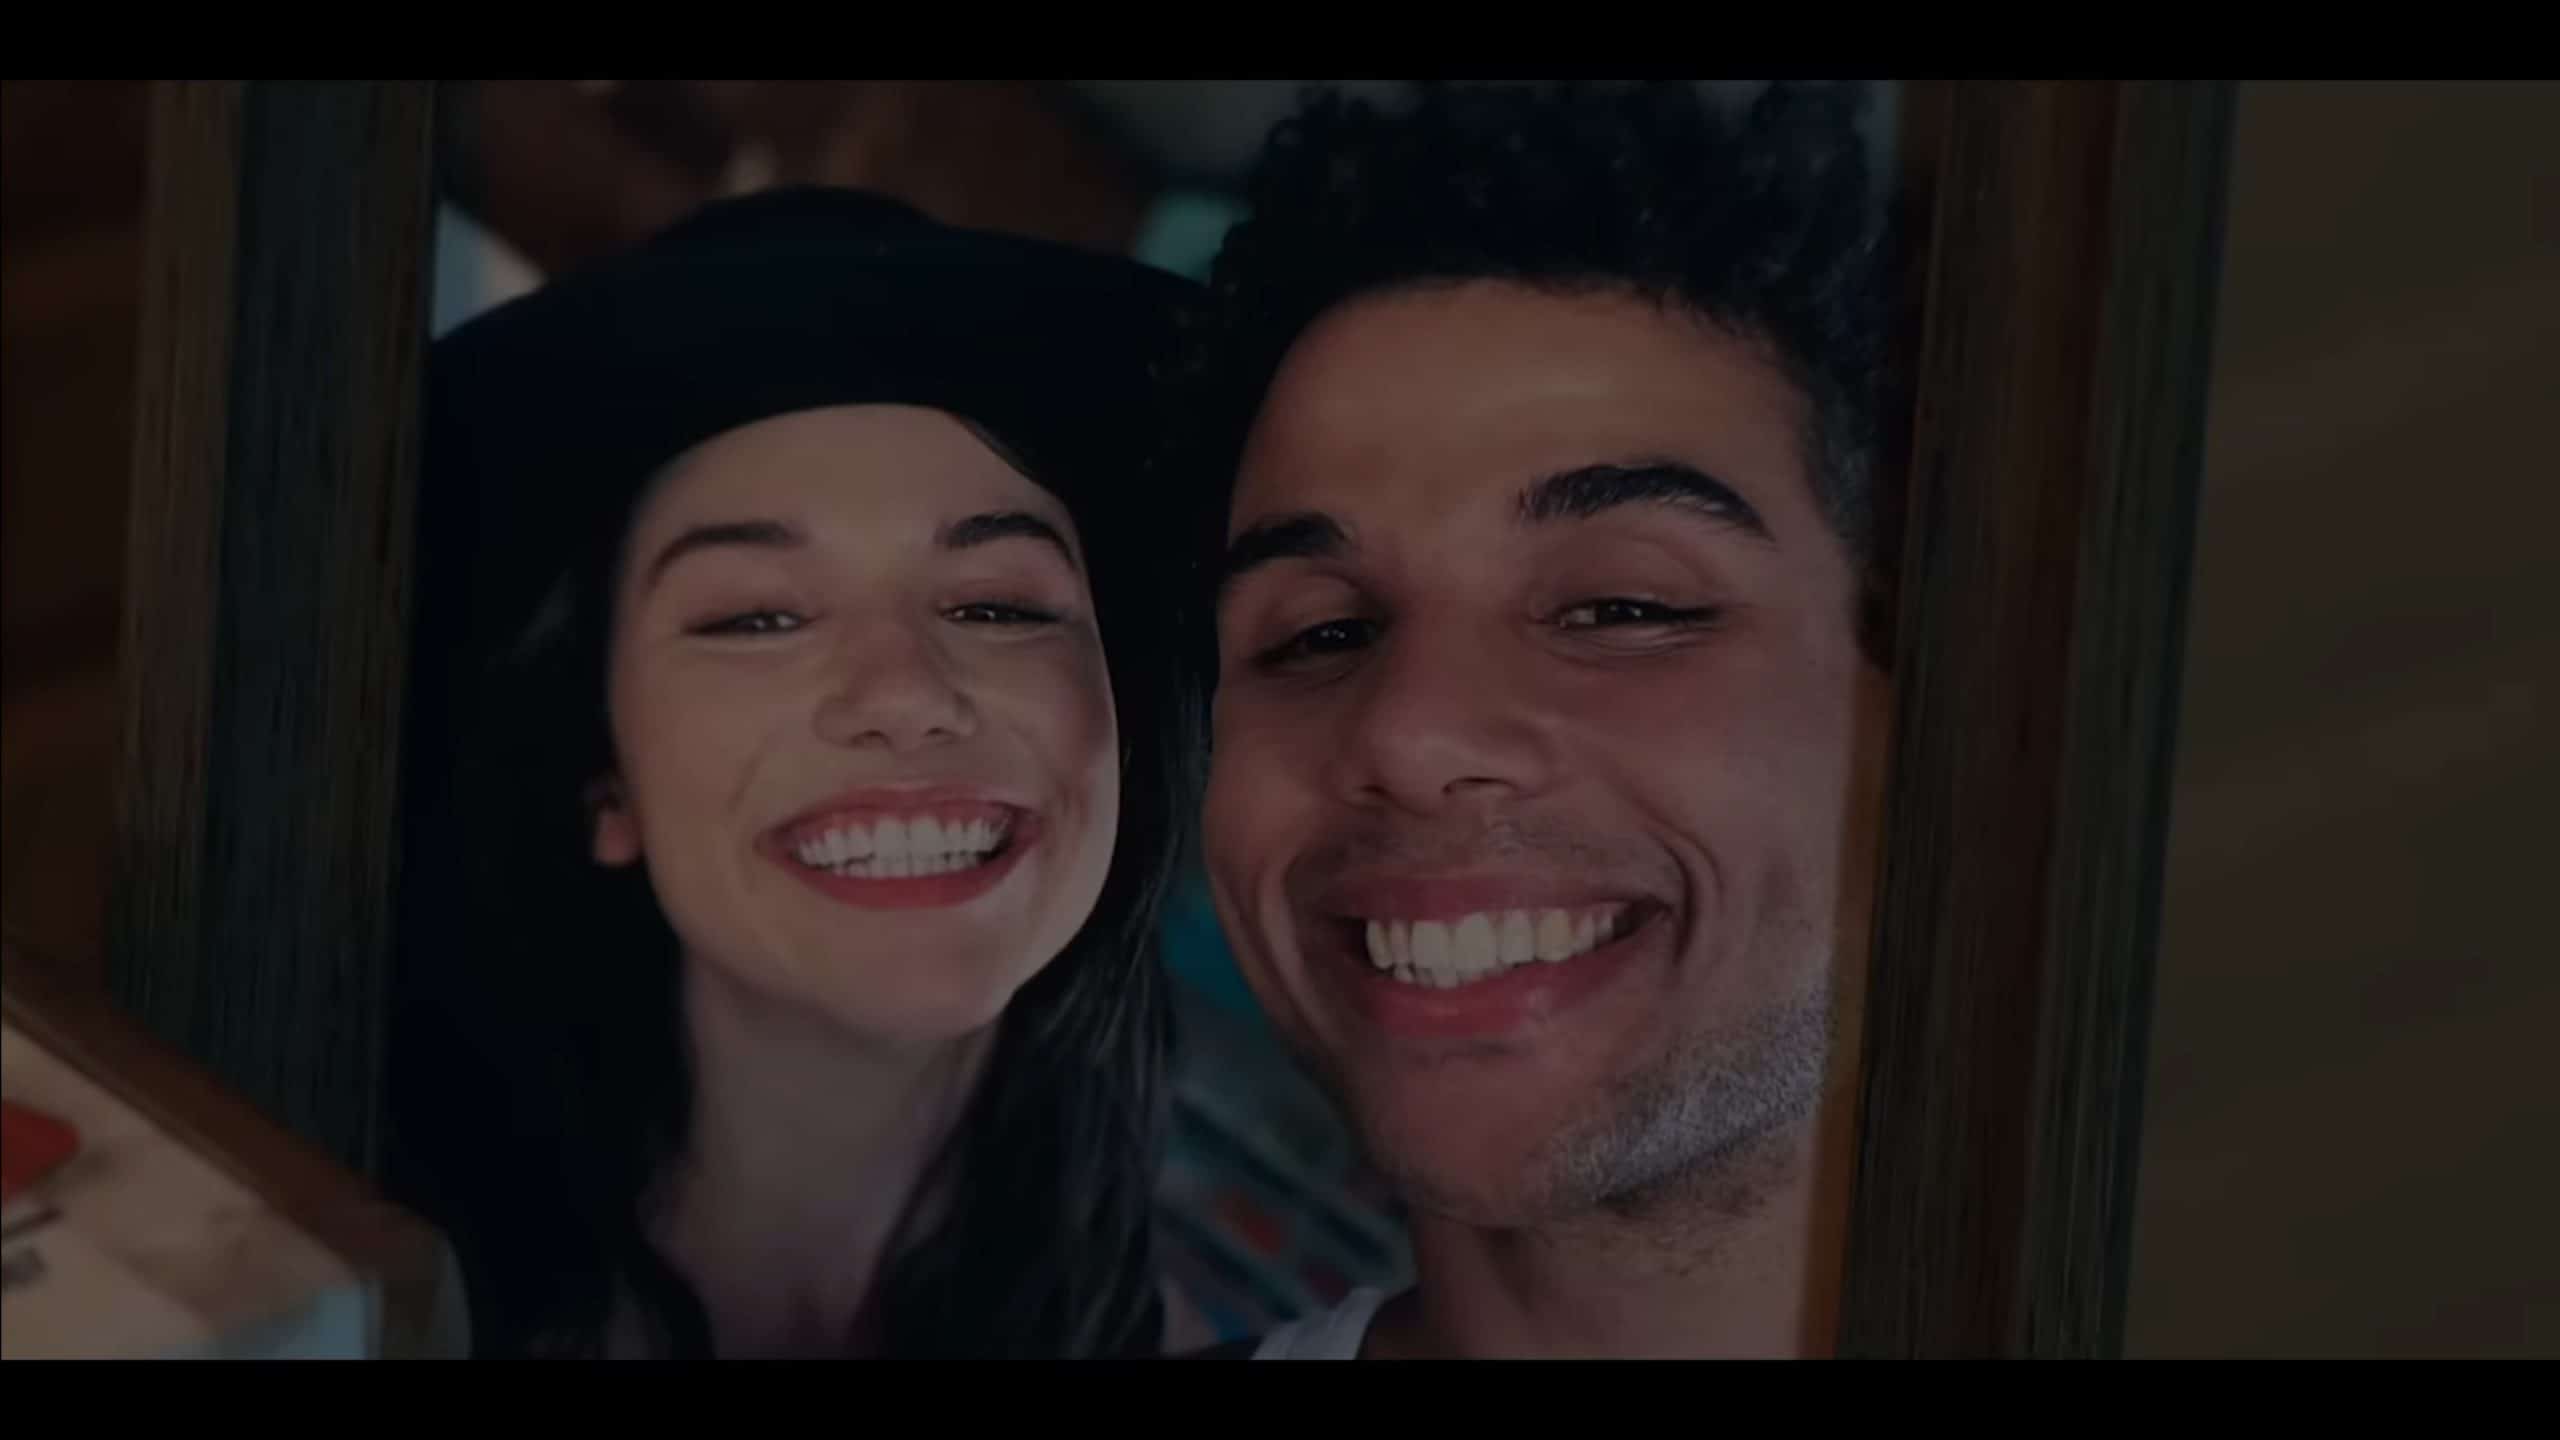 Becky (Grace Caroline Currey) and Dan (Mason Gooding) smiling in a photograph